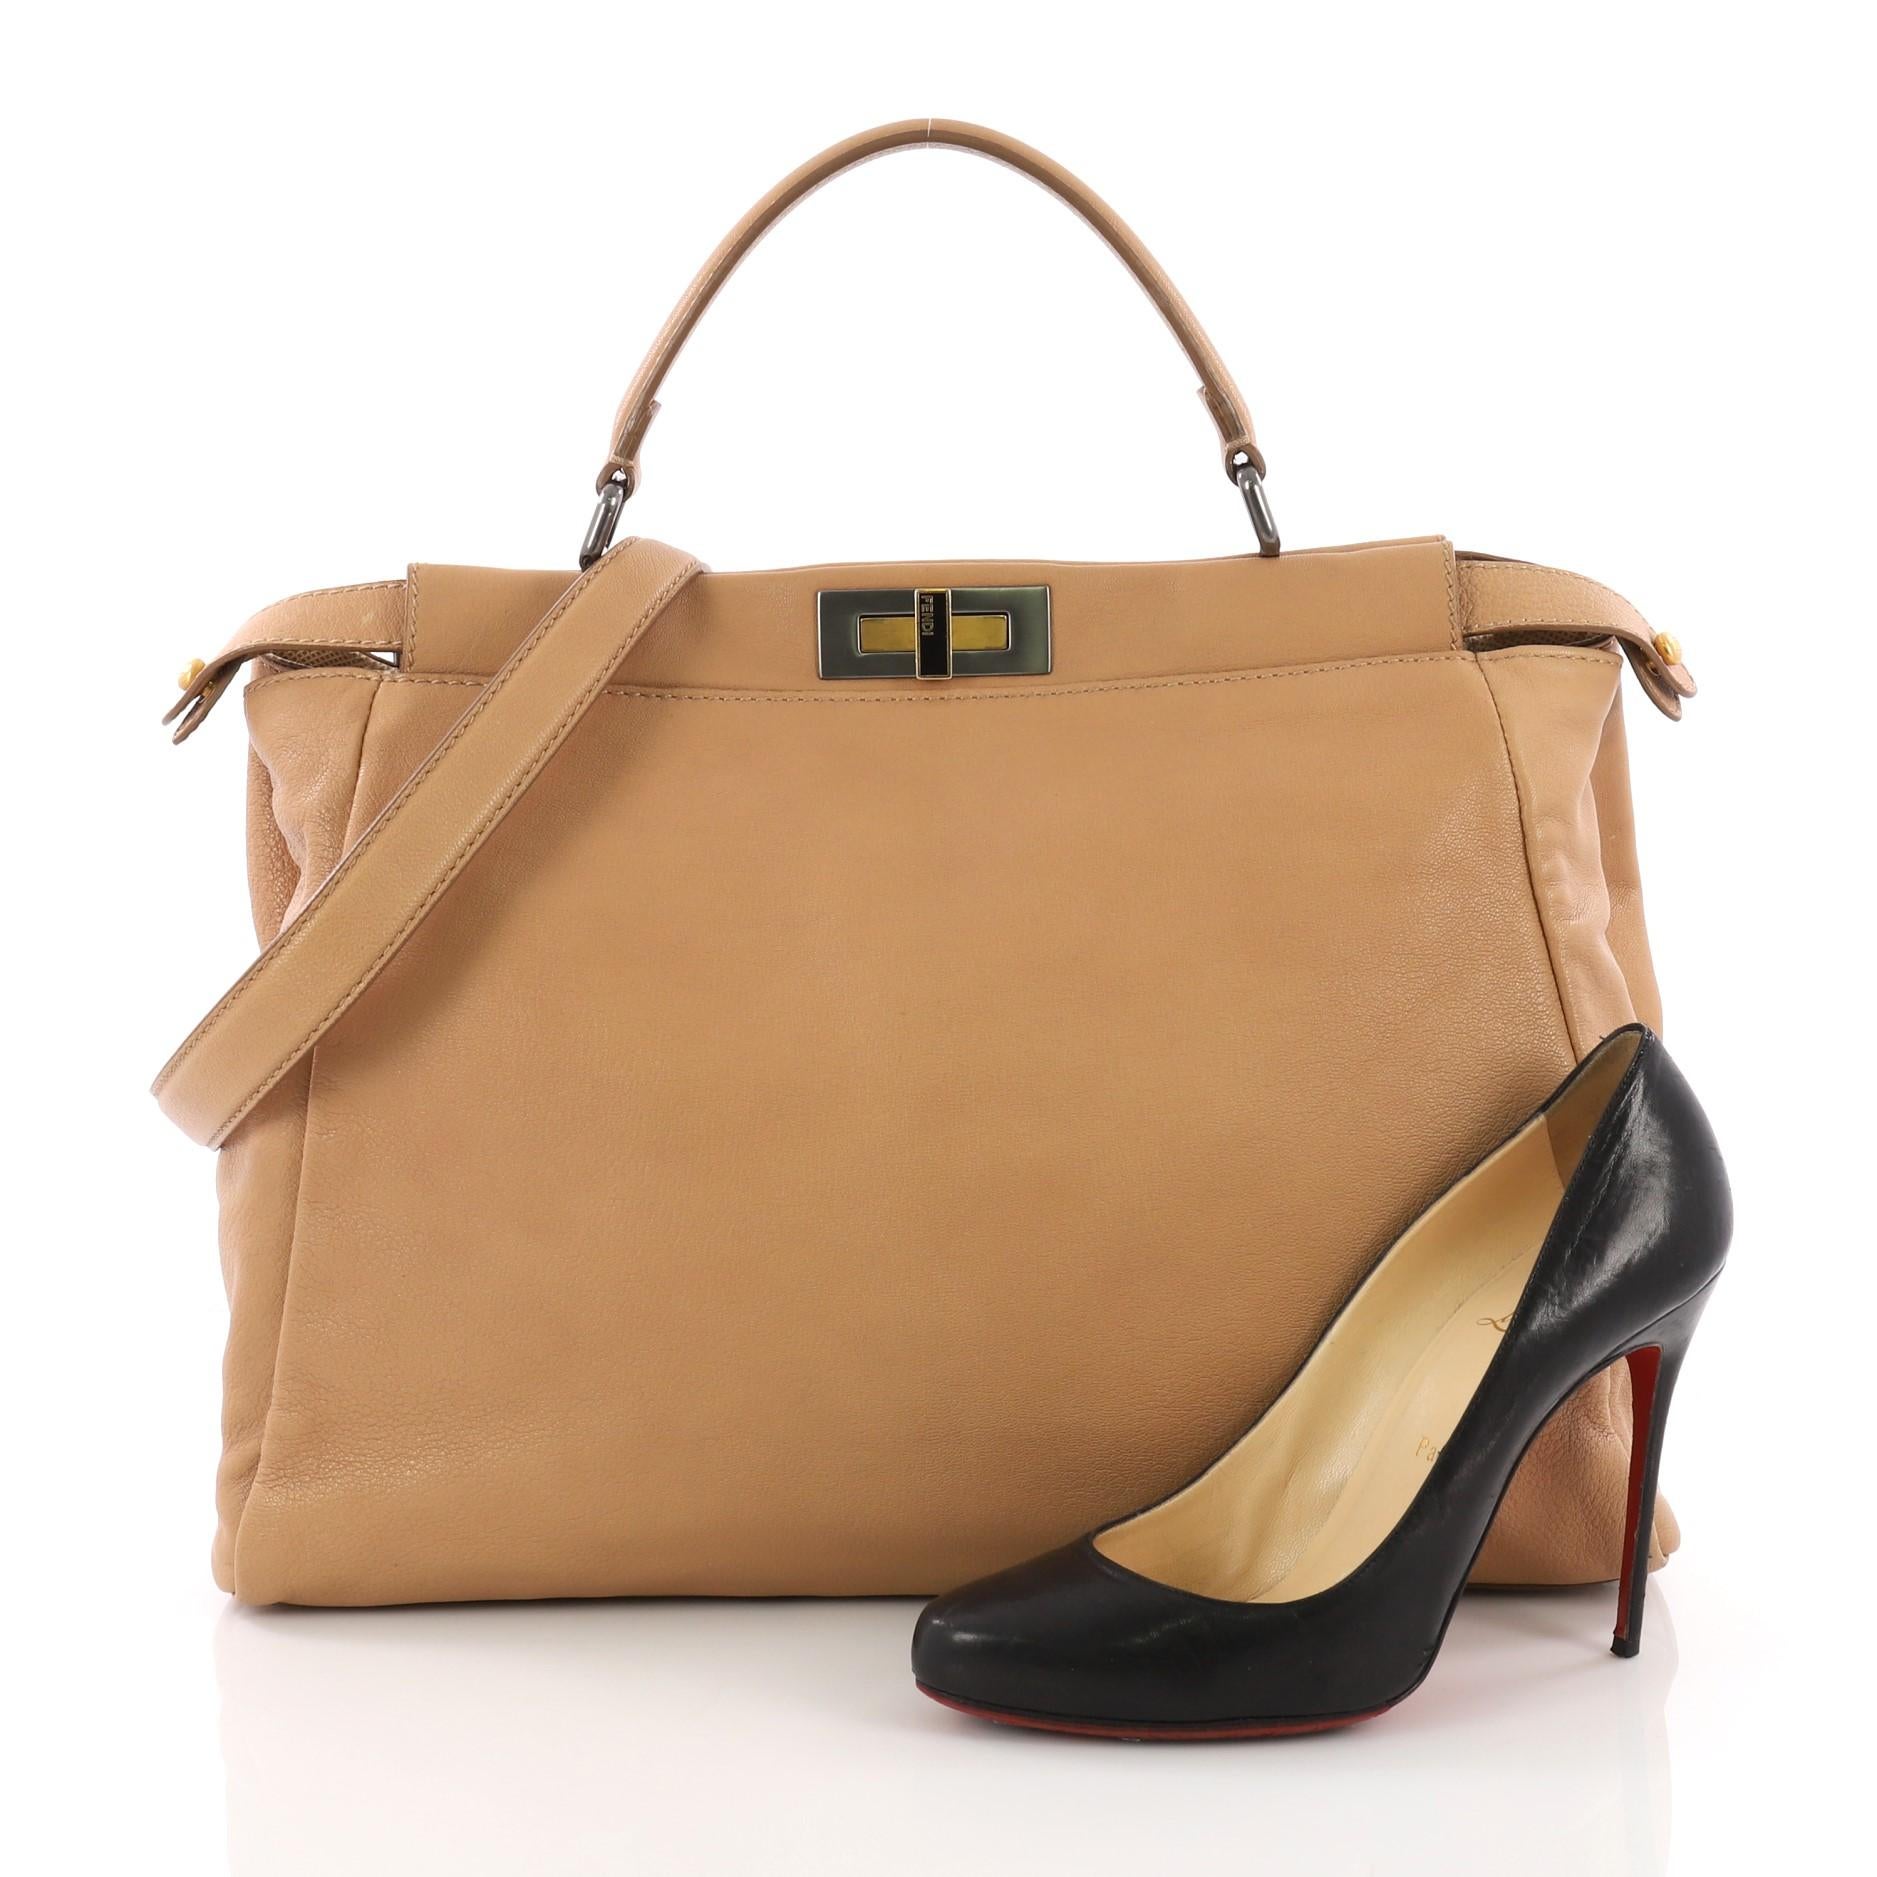 This Fendi Peekaboo Handbag Leather Large, crafted in brown leather, features a flat leather top handle, protective base studs and gunmetal and gold-tone hardware accents. Its turn-lock closures on both sides opens to a beige fabric interior with a